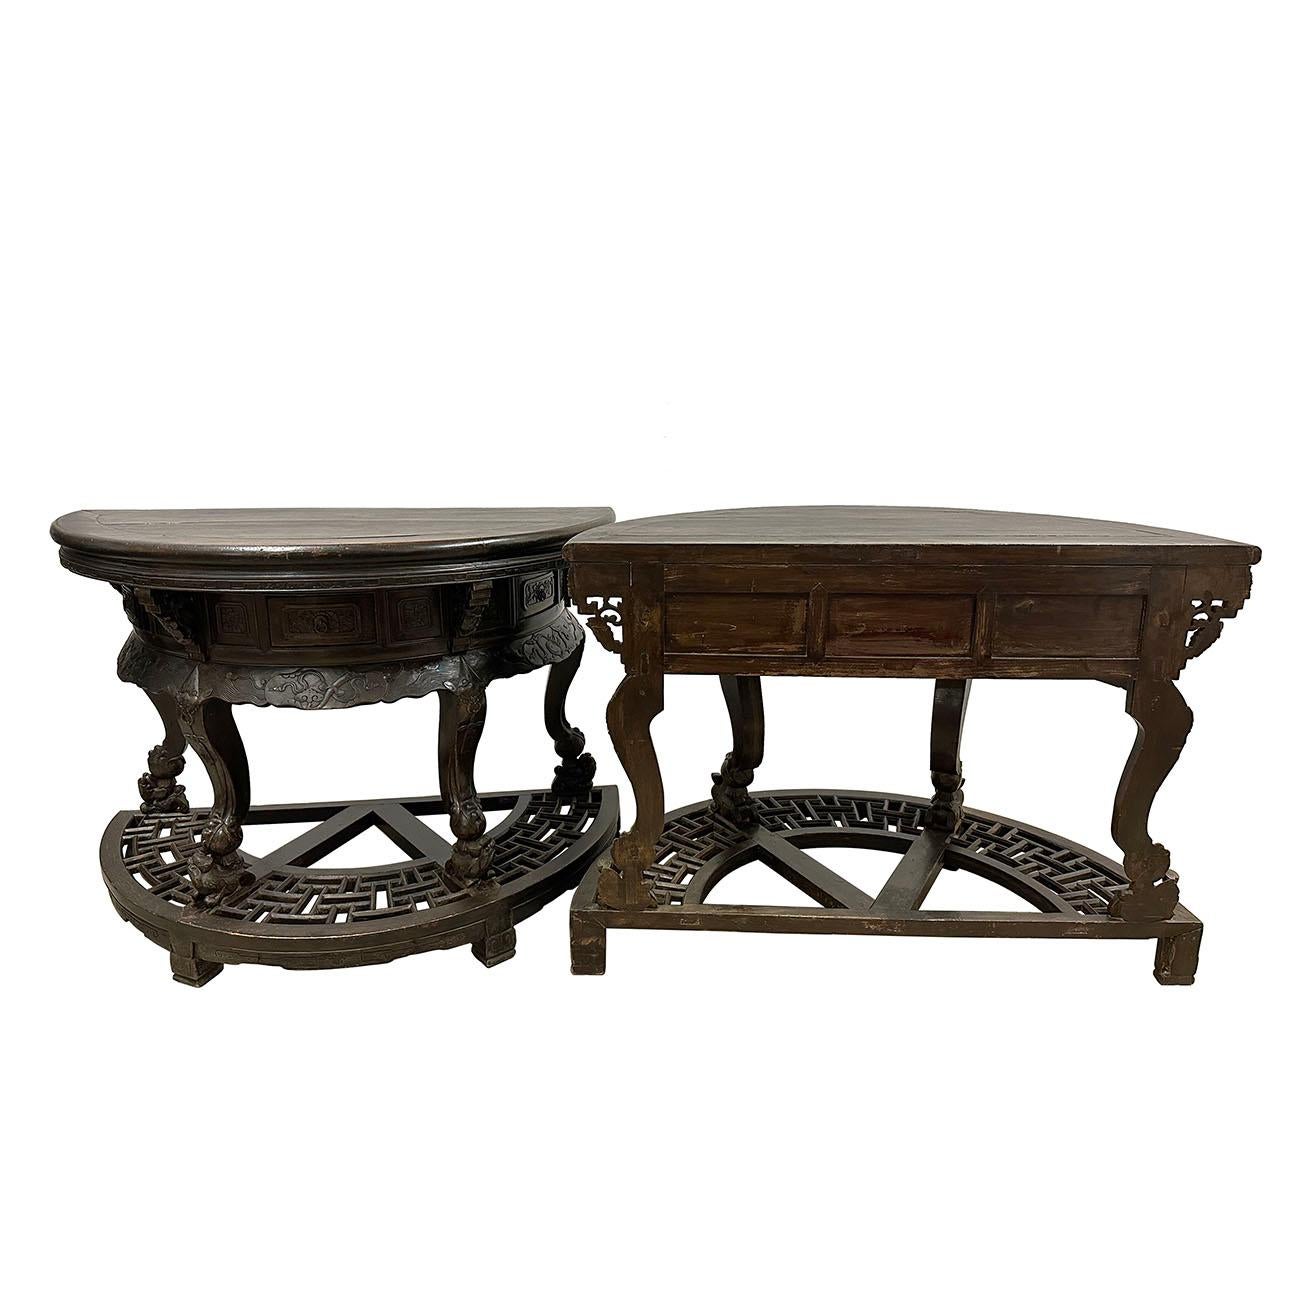 19th Century Antique Chinese Hand Carved Half Moon Tables, Set of 2 For Sale 12